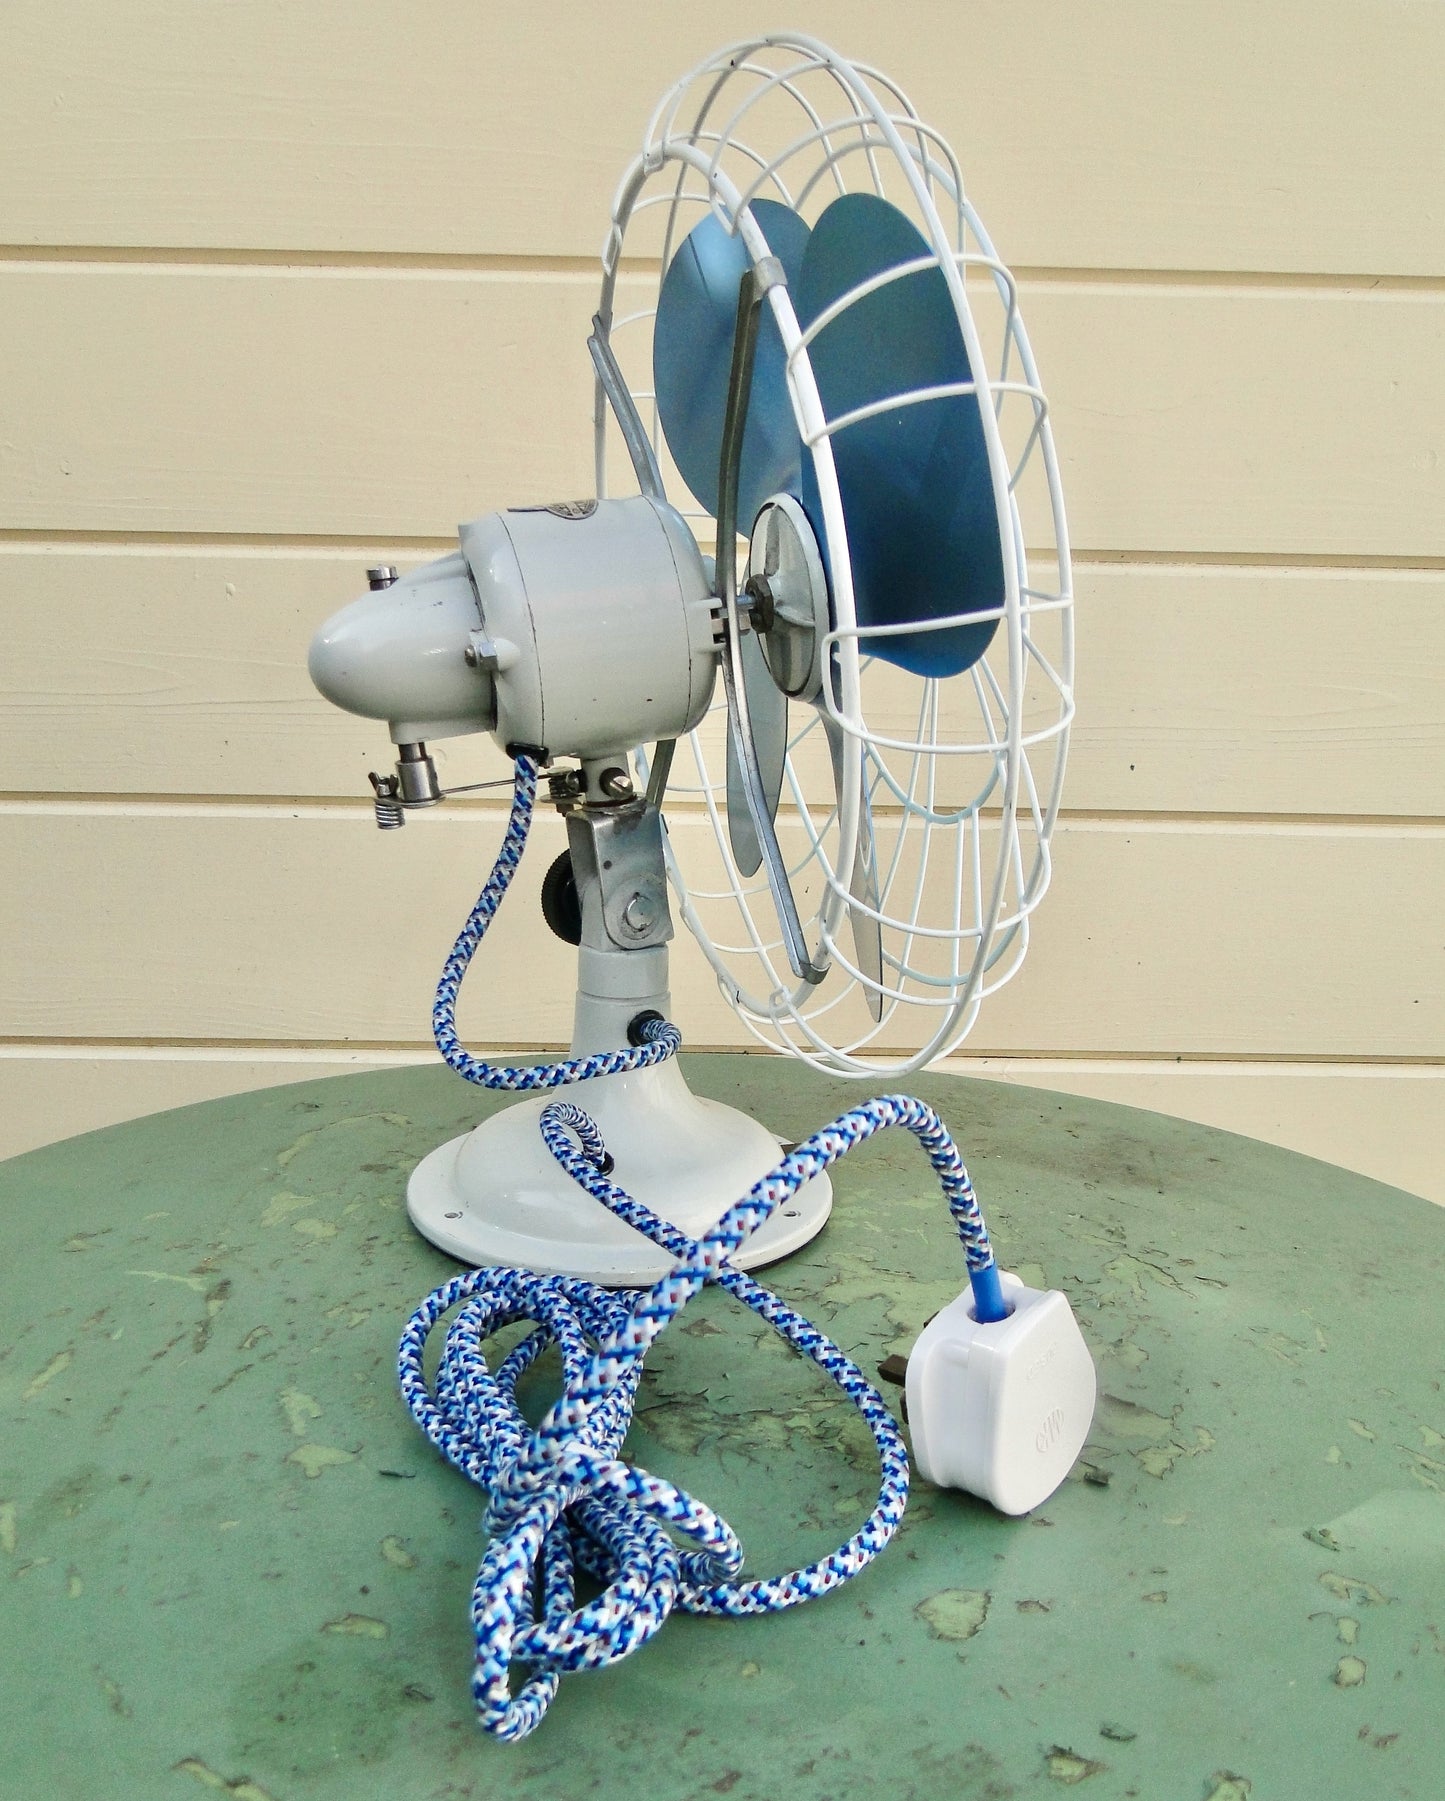 1950s 12 inch Vintage Limit Desk Fan With Blue Blades And Grey Body